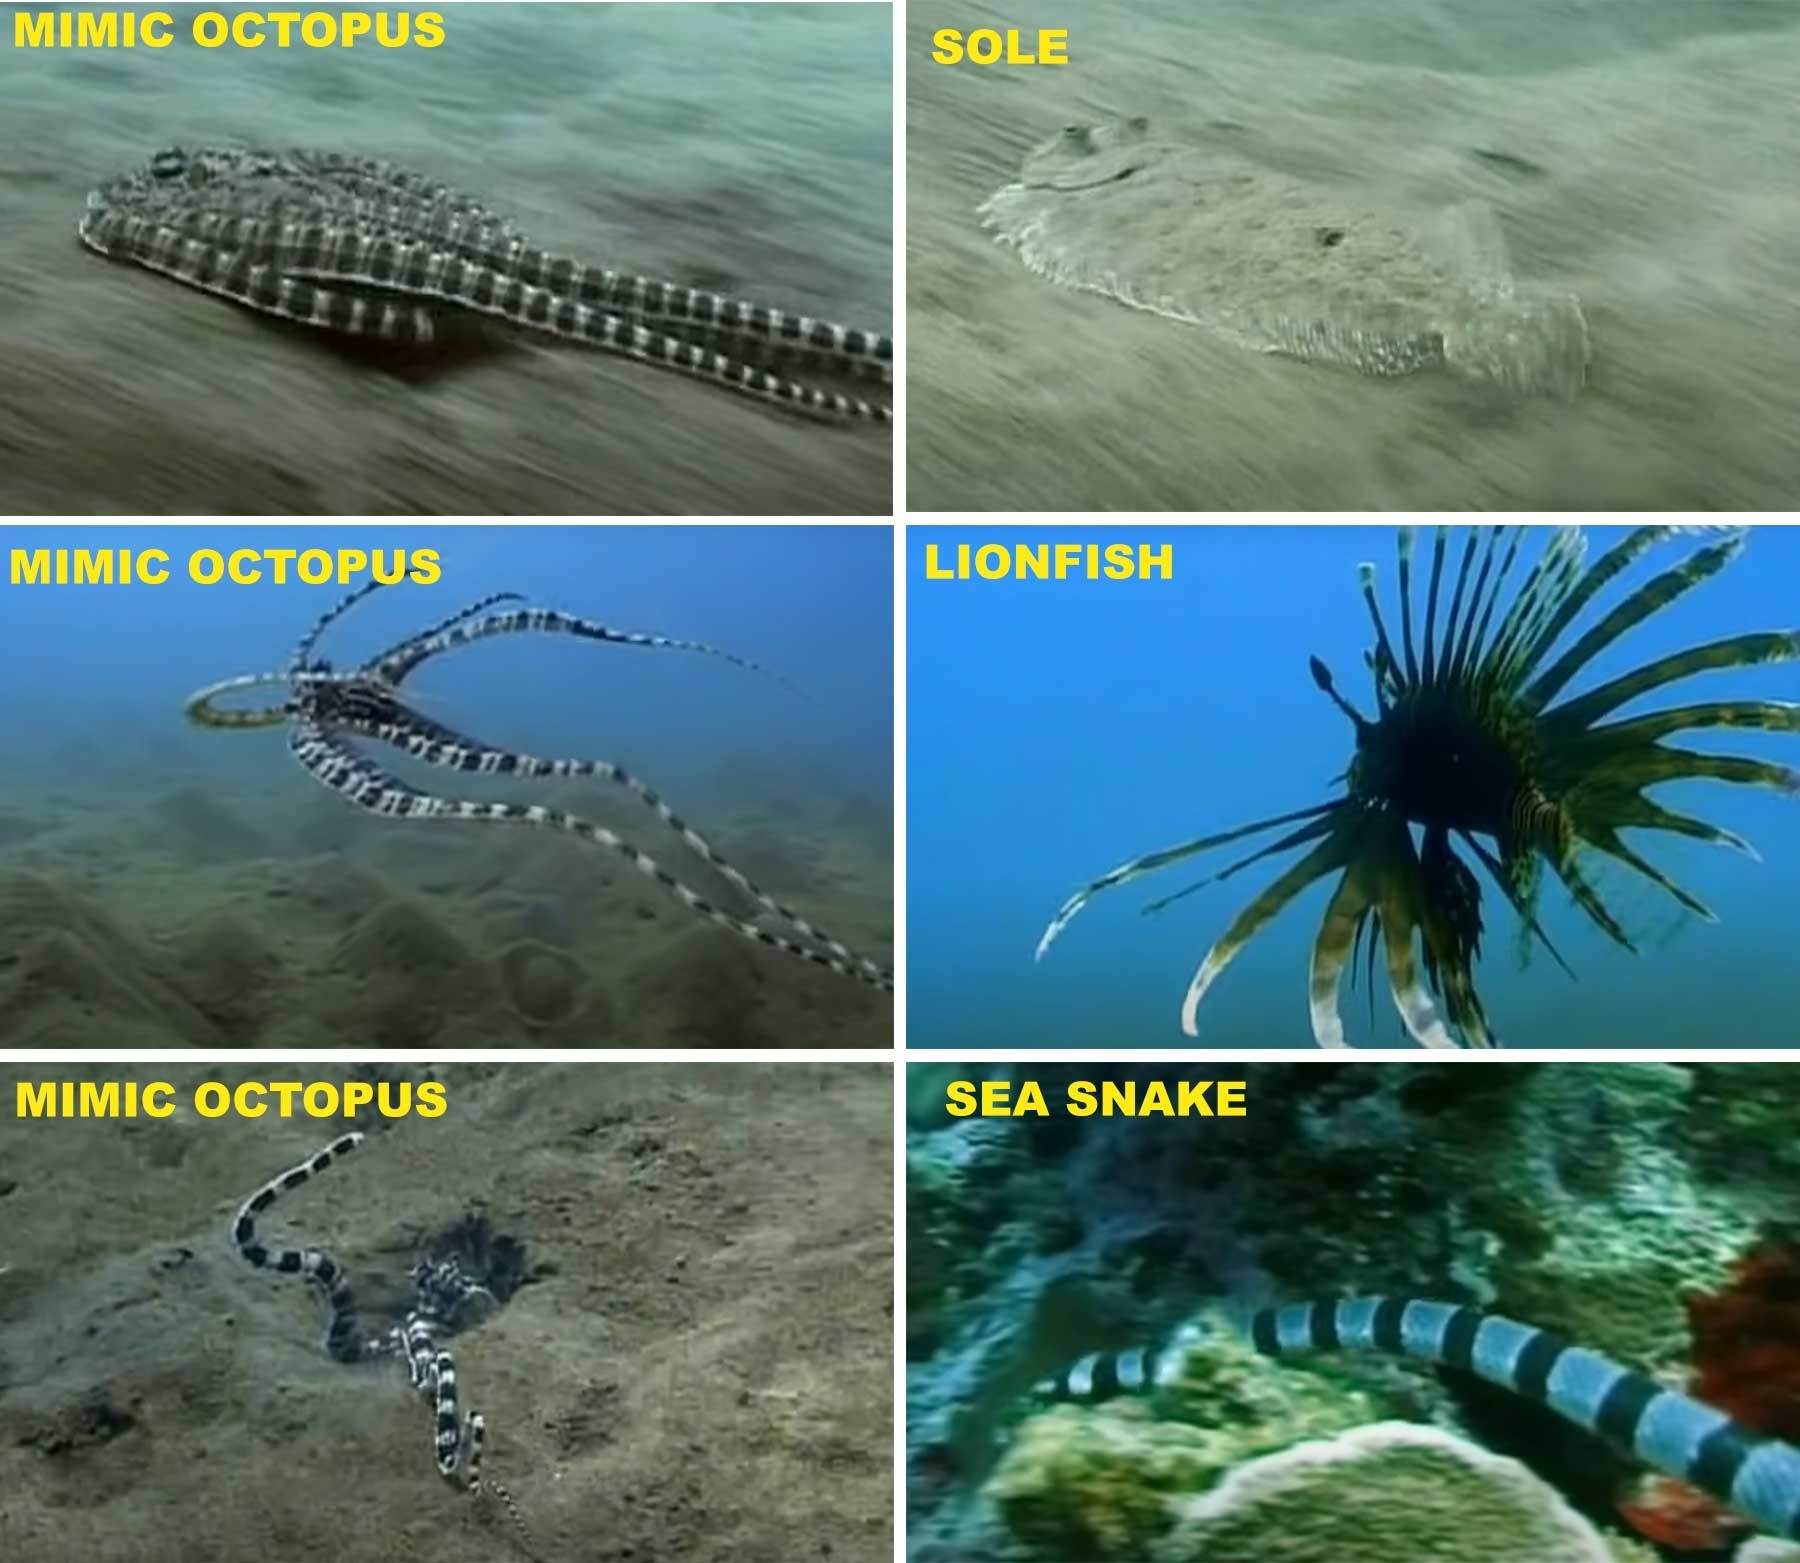 the octopus mimicking a sea snake, a lionfish, and more